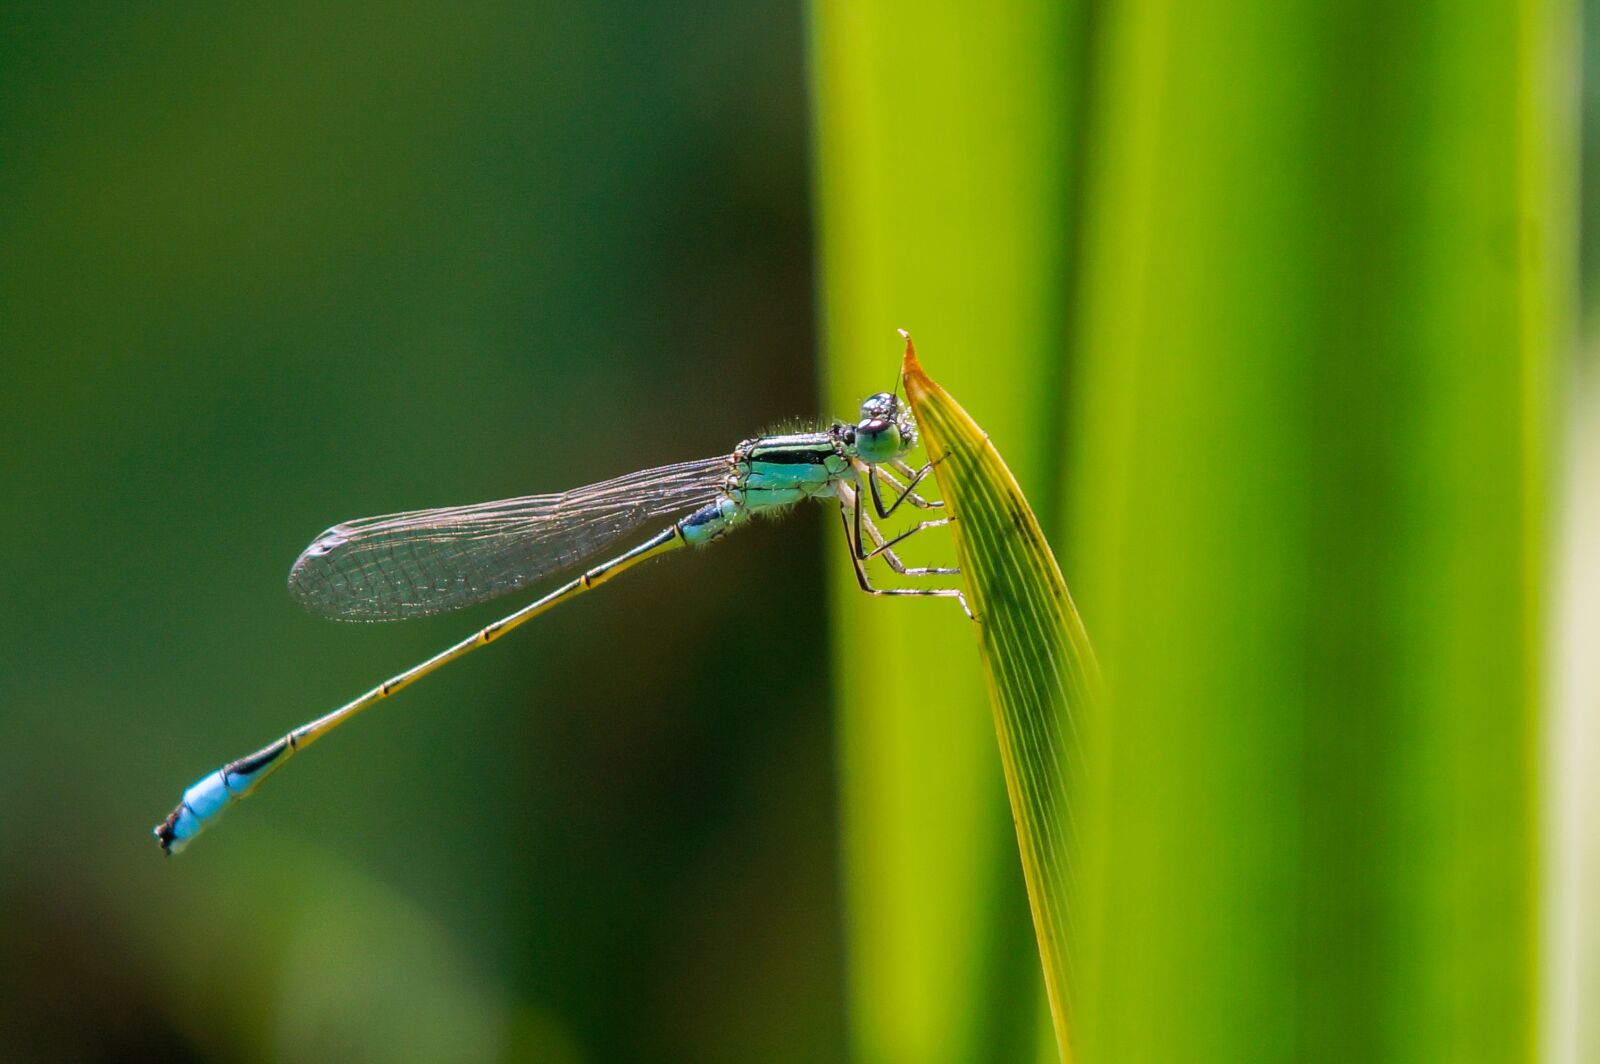 Sony SLT-A77 sample photo. Damselfly, insect, nature photography